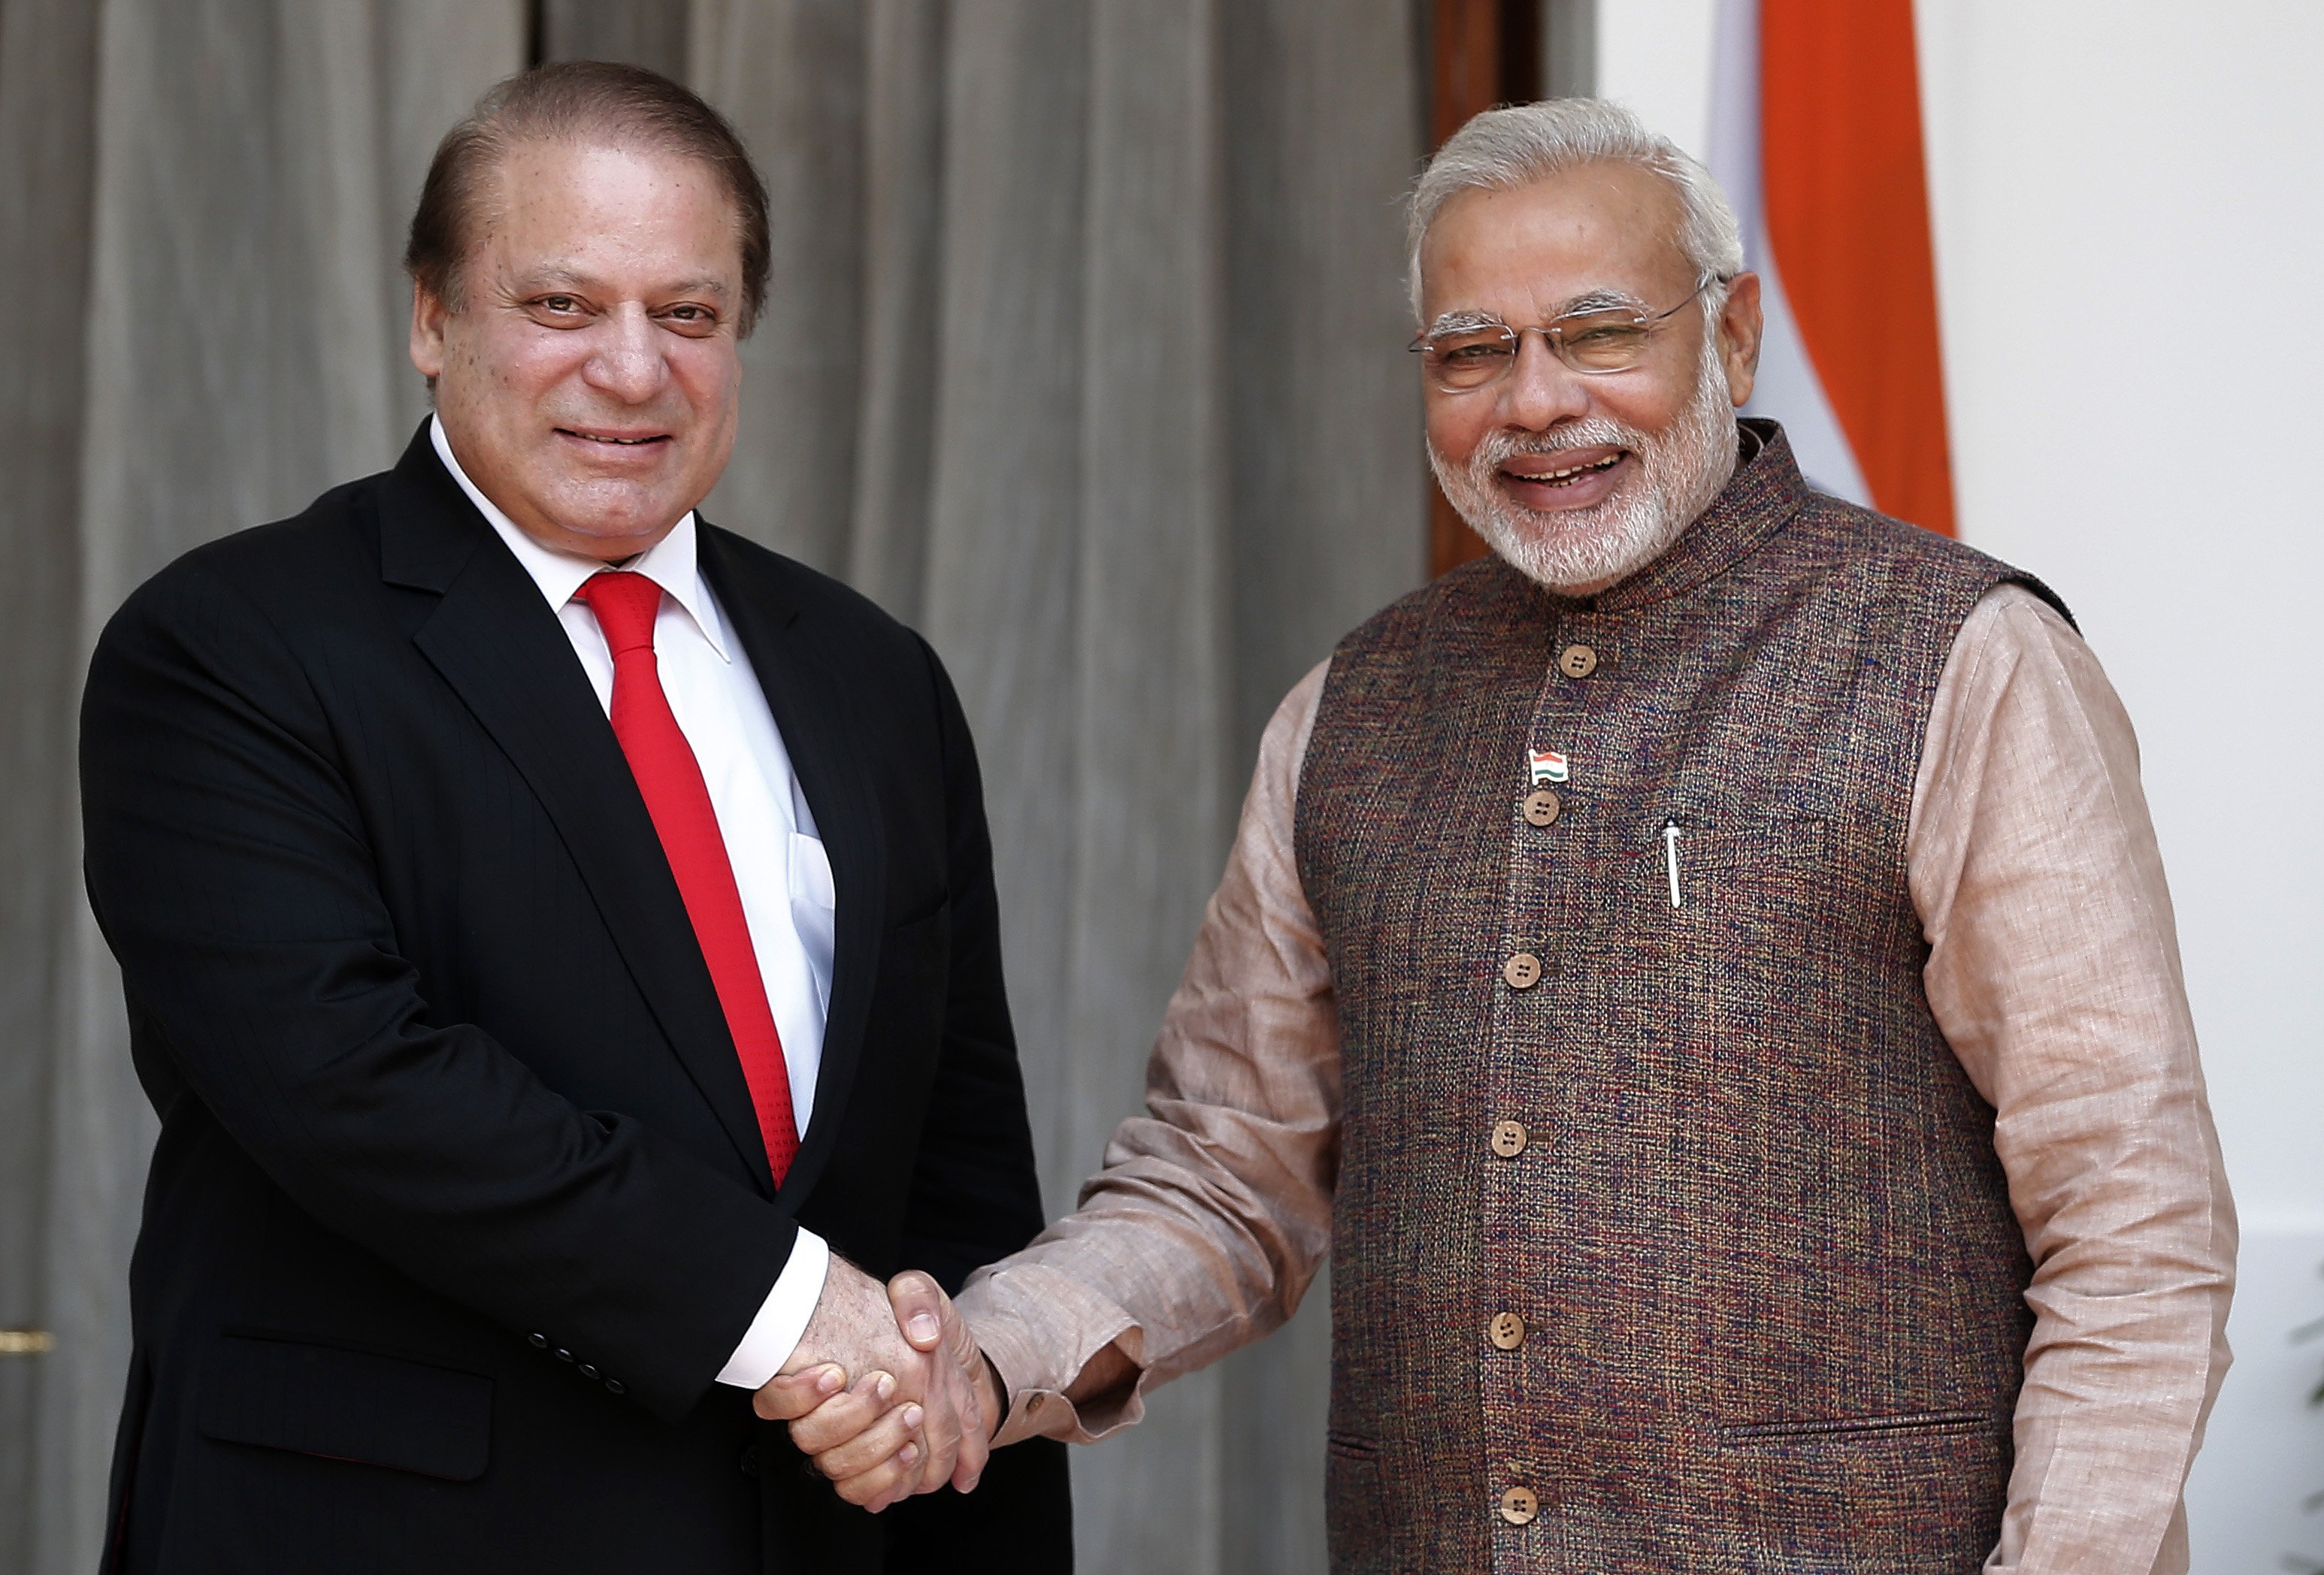 An Open Letter To PM Modi & PM Sharif To Increase Mutual Trust And Decrease Defense Spending